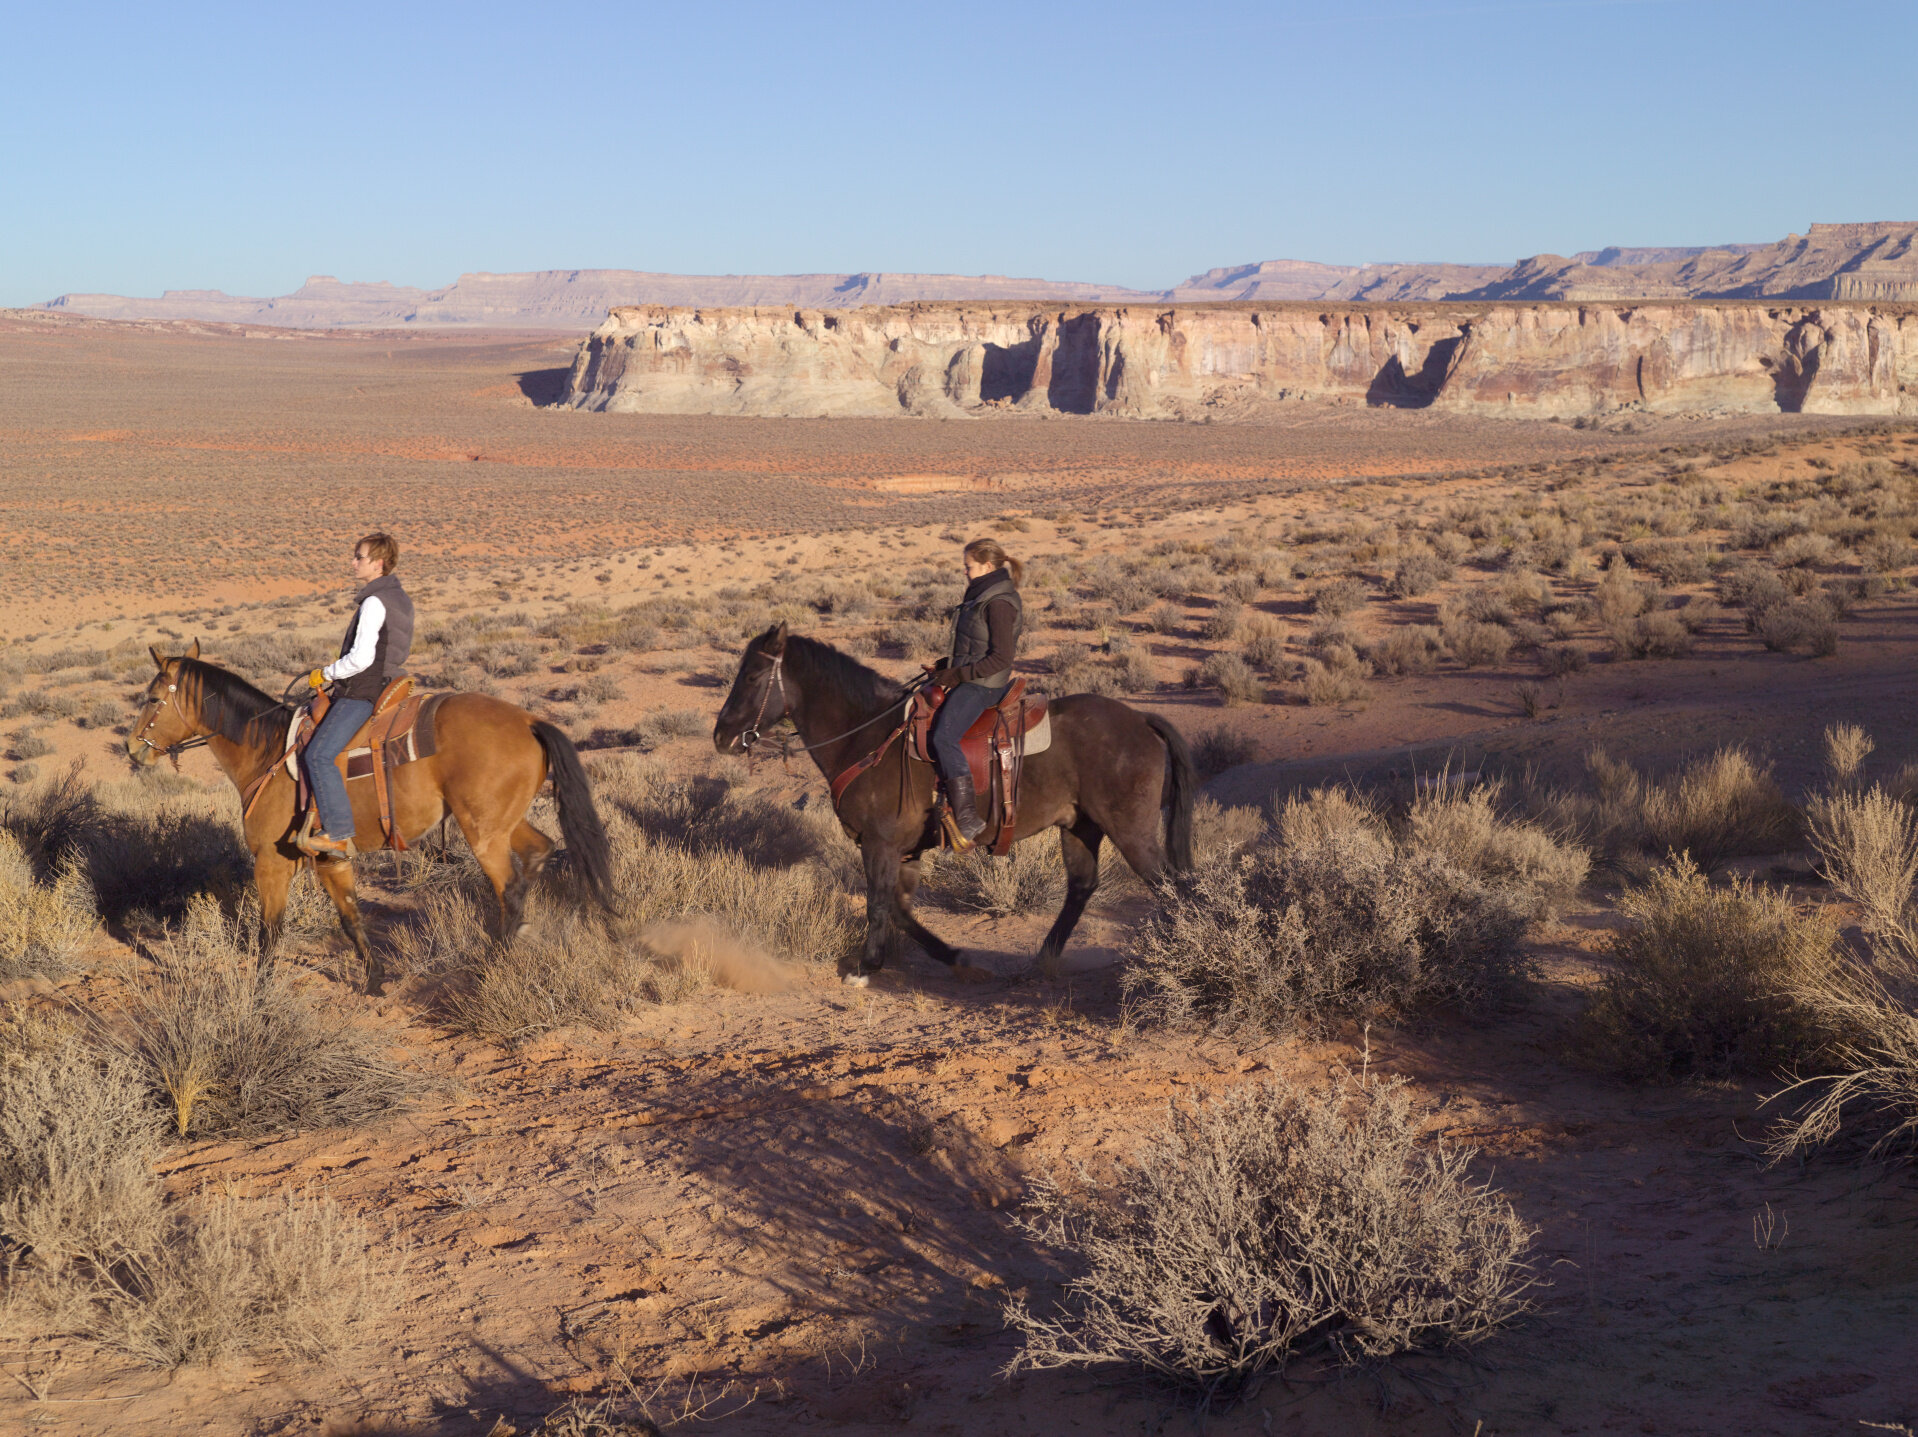   Horseback riding in the American Southwest (photo credit: Aman)  